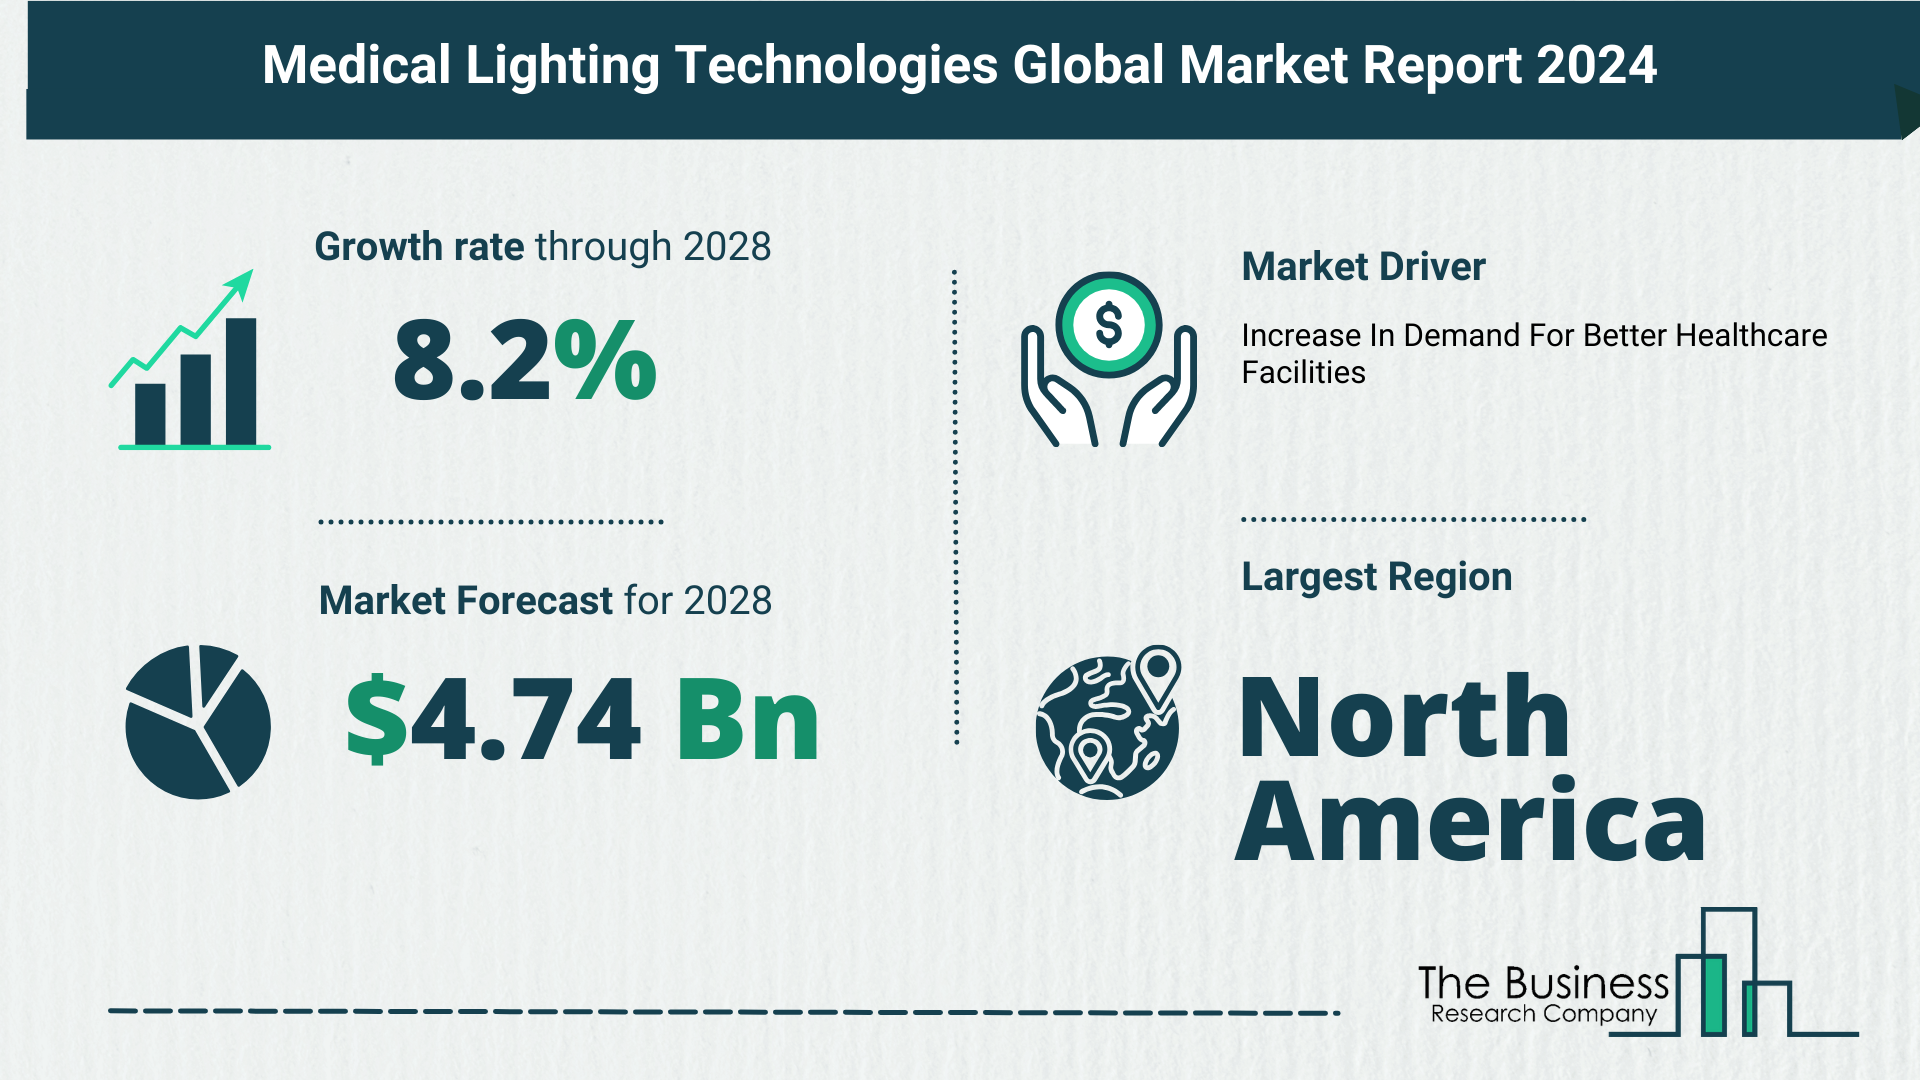 What Is The Forecast Growth Rate For The Medical Lighting Technologies Market?